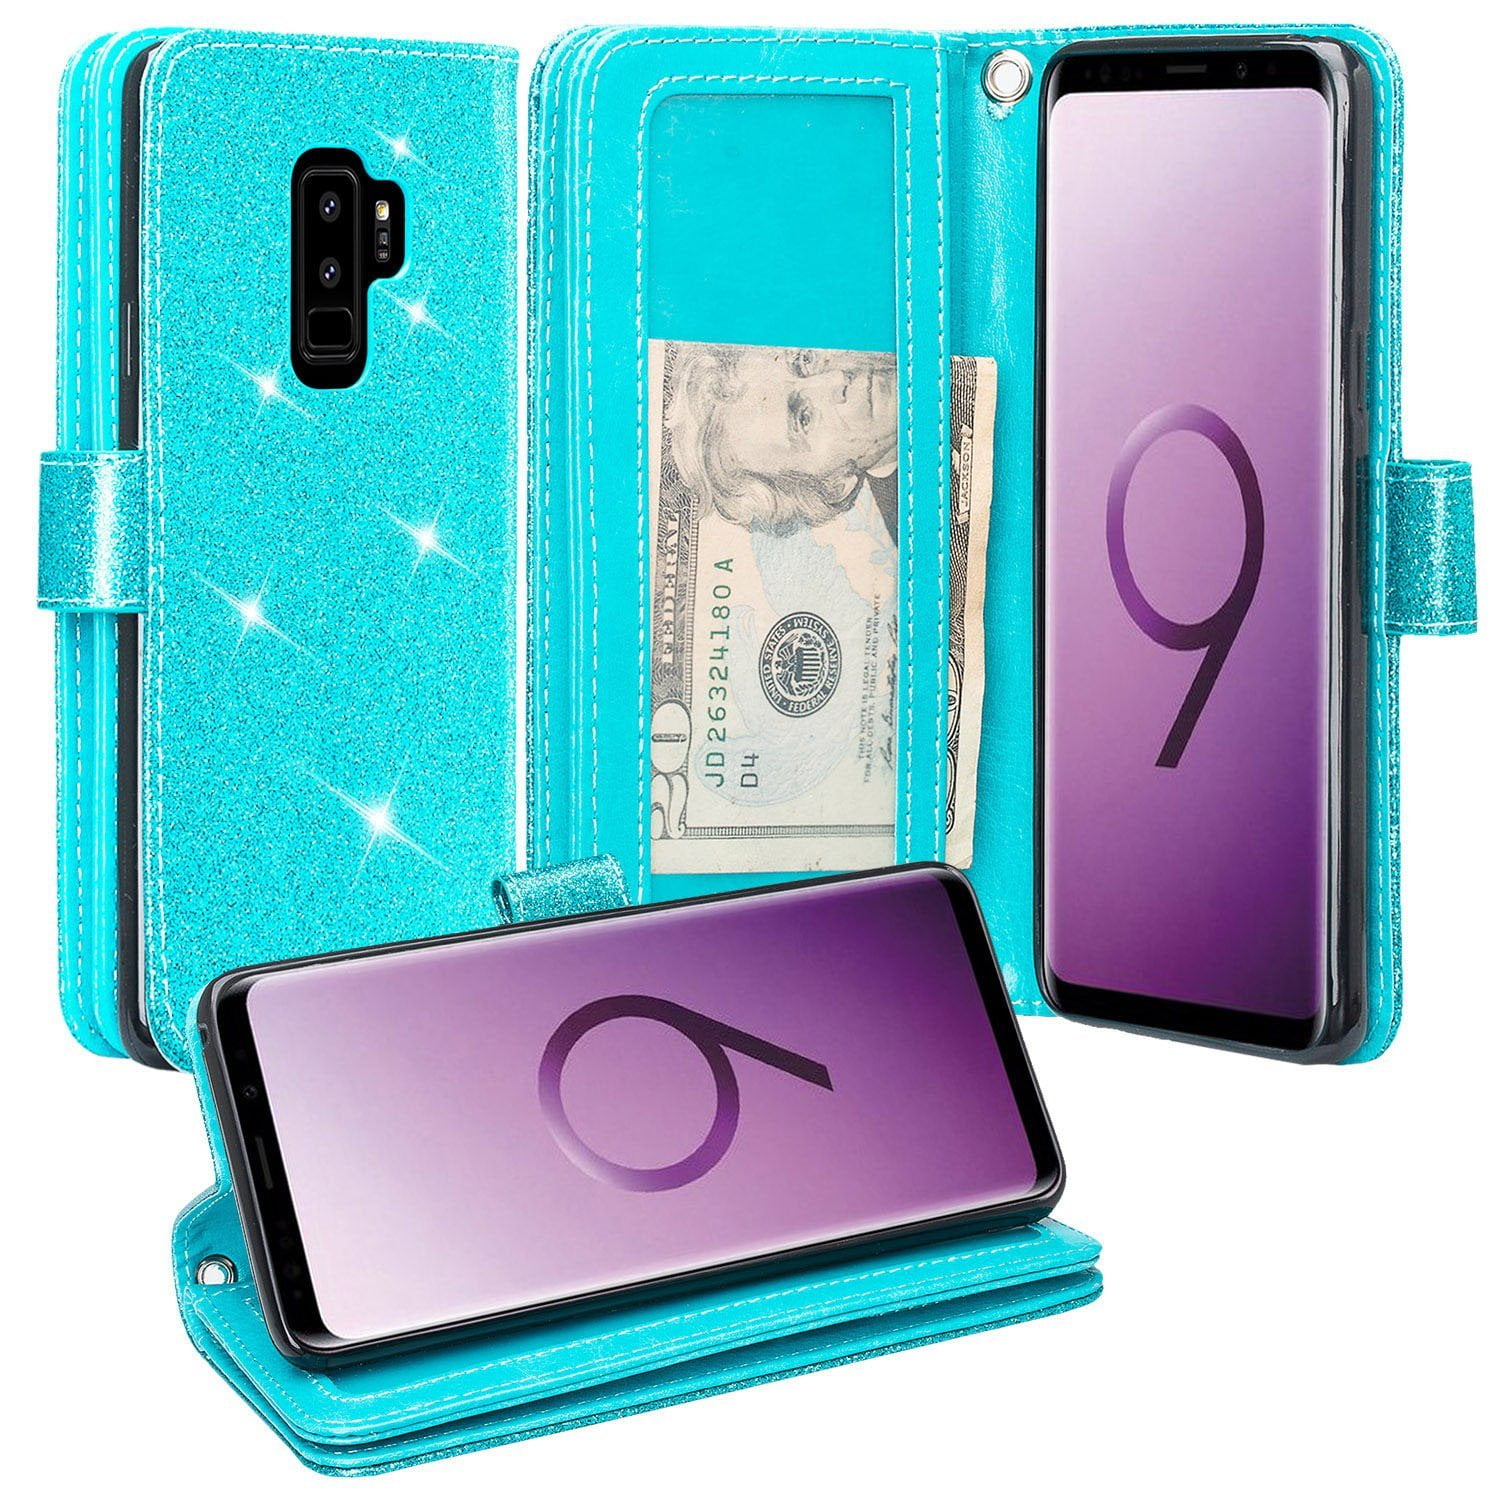 Butterfly Pattern Leather Flip Wallet Cover Protective Cases for Samsung Galaxy S9 Plus Purple iDoer S9 Plus Case